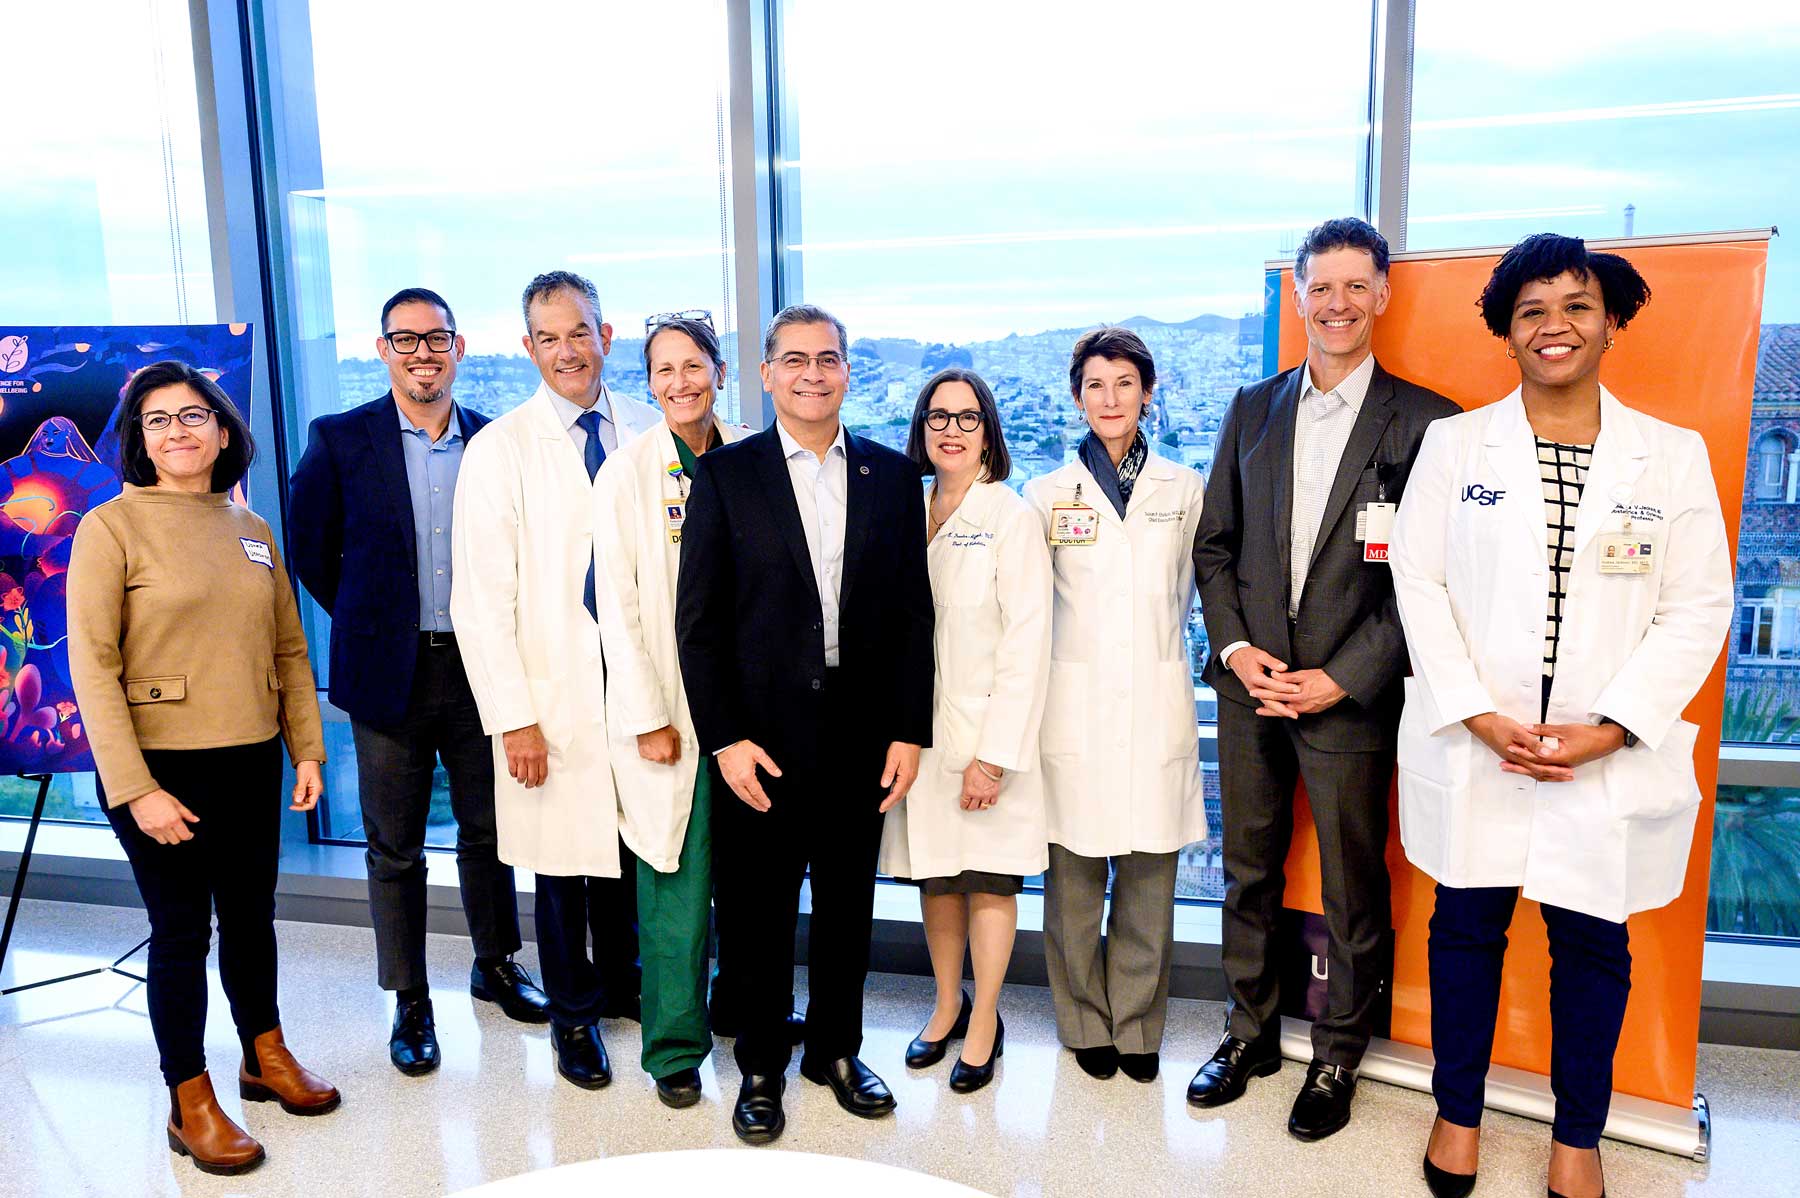 Xavier Becerra (center) stands with doctors and staff of UCSF and ANSIRH in front of large glass panes with the San Francisco cityscape in the background.